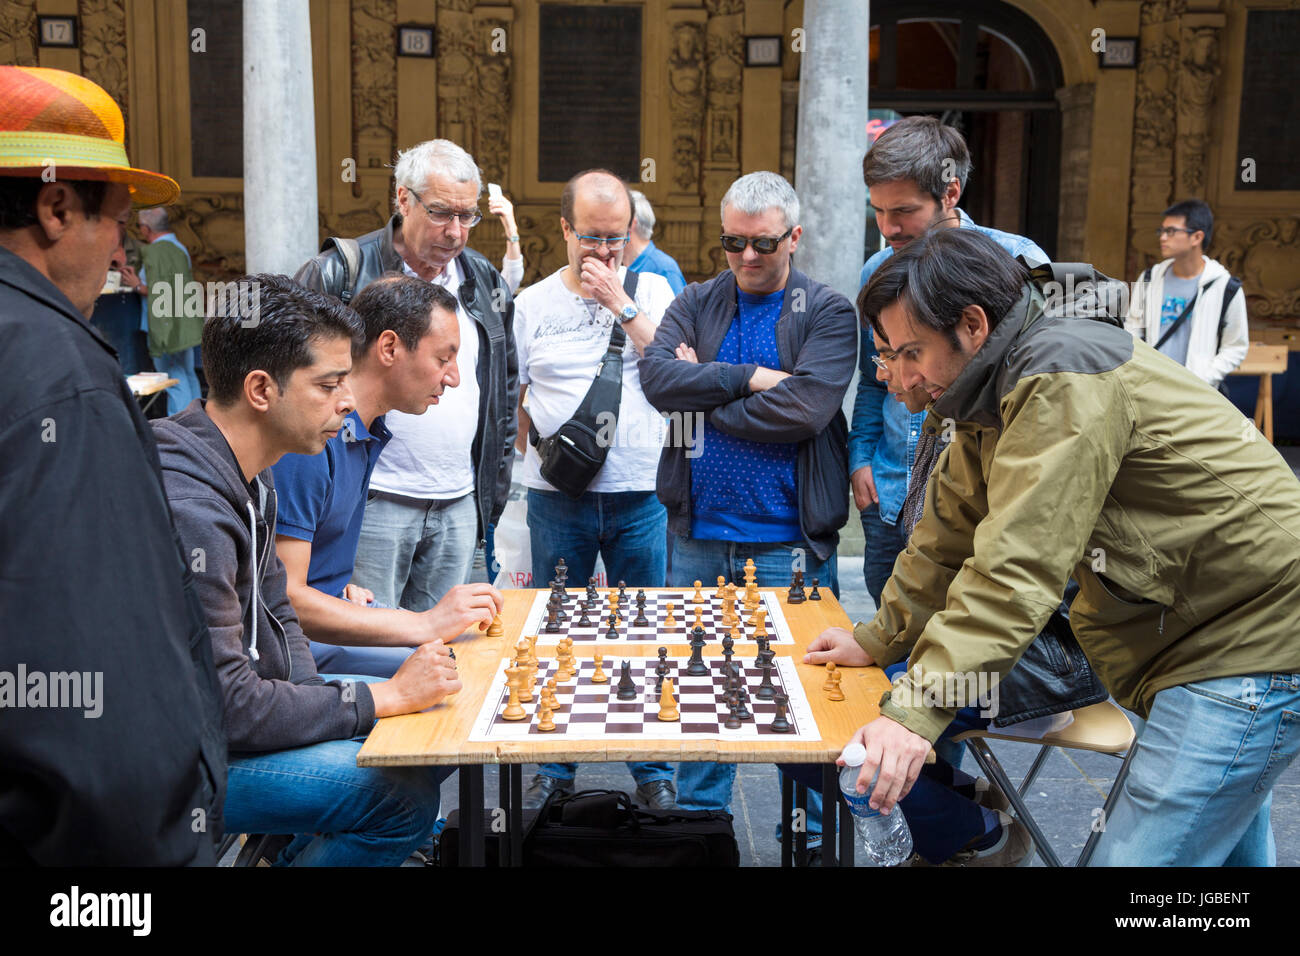 Group of men playing chess whilst others watching in the courtyard of La Vieille Bourse (Old Stock Exchange) in Lille, France Stock Photo